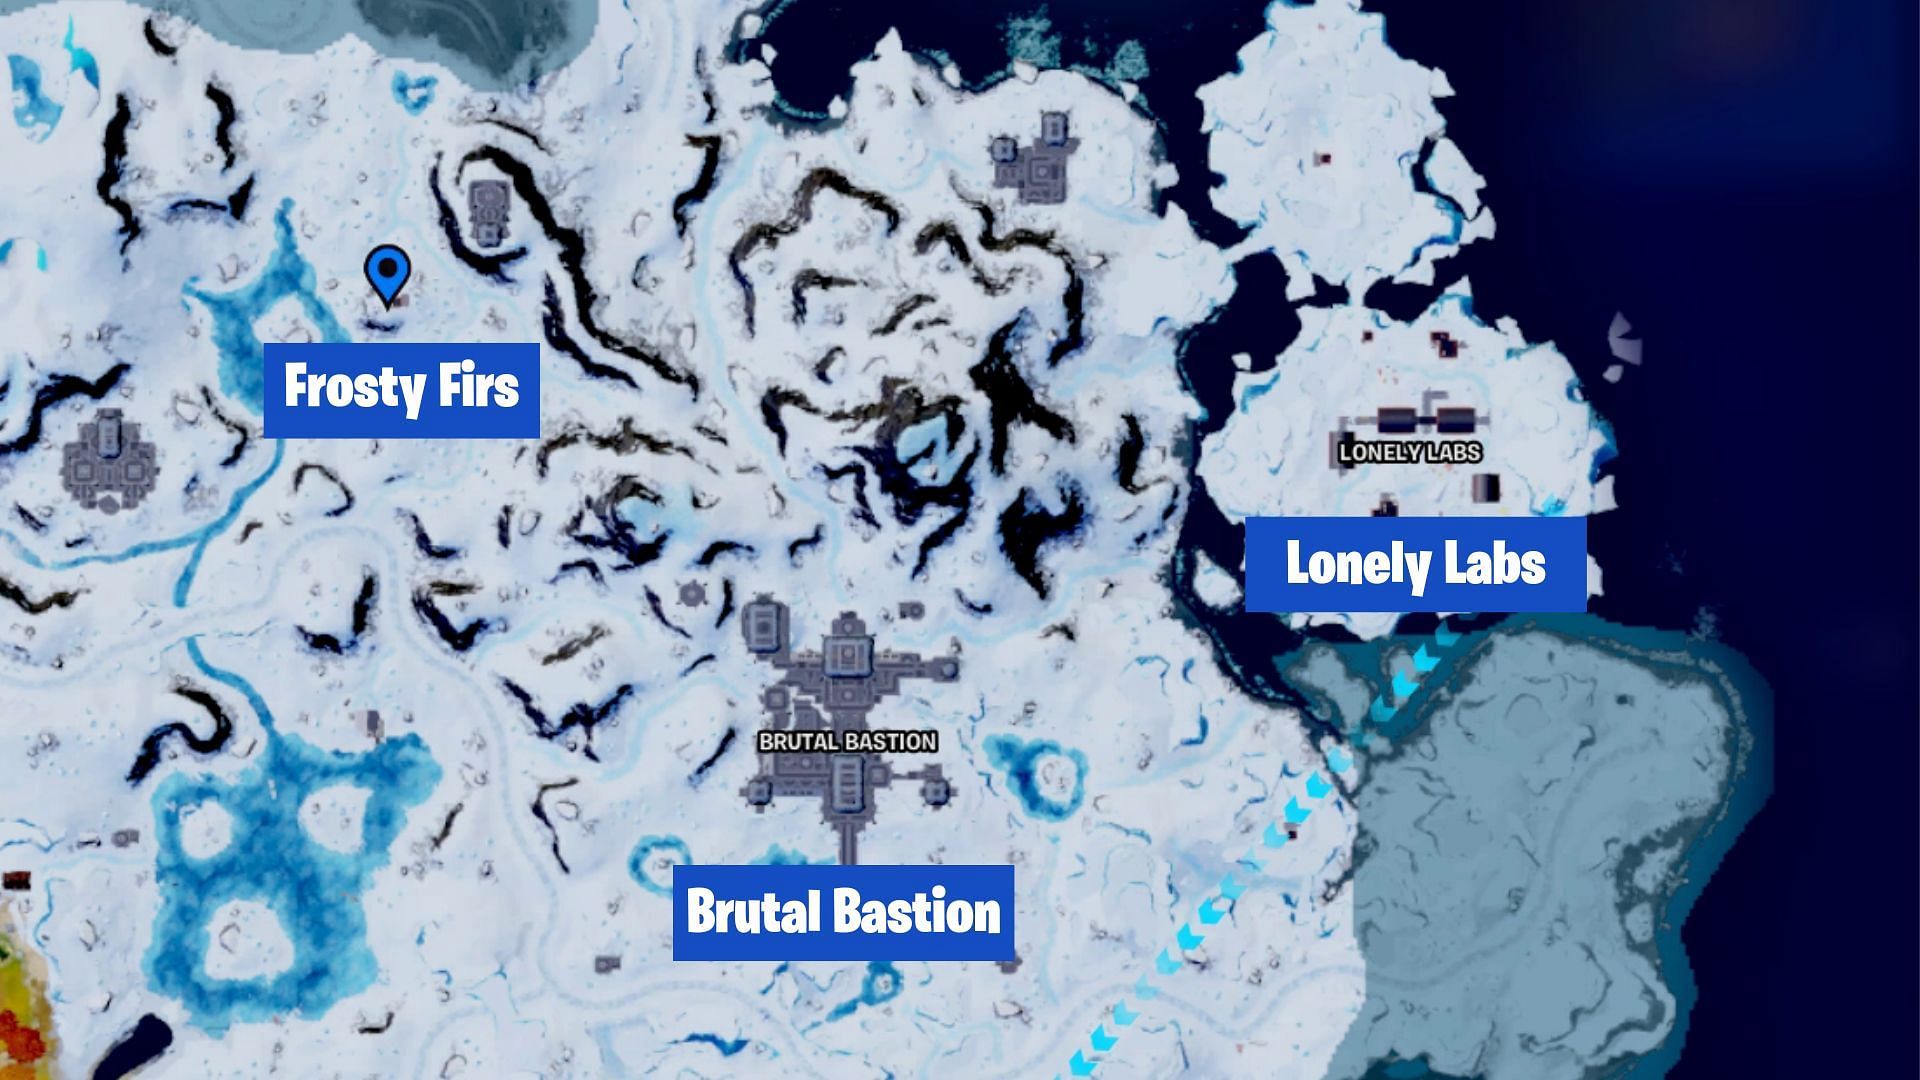 Locate Brutal Bastion, Frosty Firs, and Lonely Labs towards the North of the Fortnite map (Image via Sportskeeda)